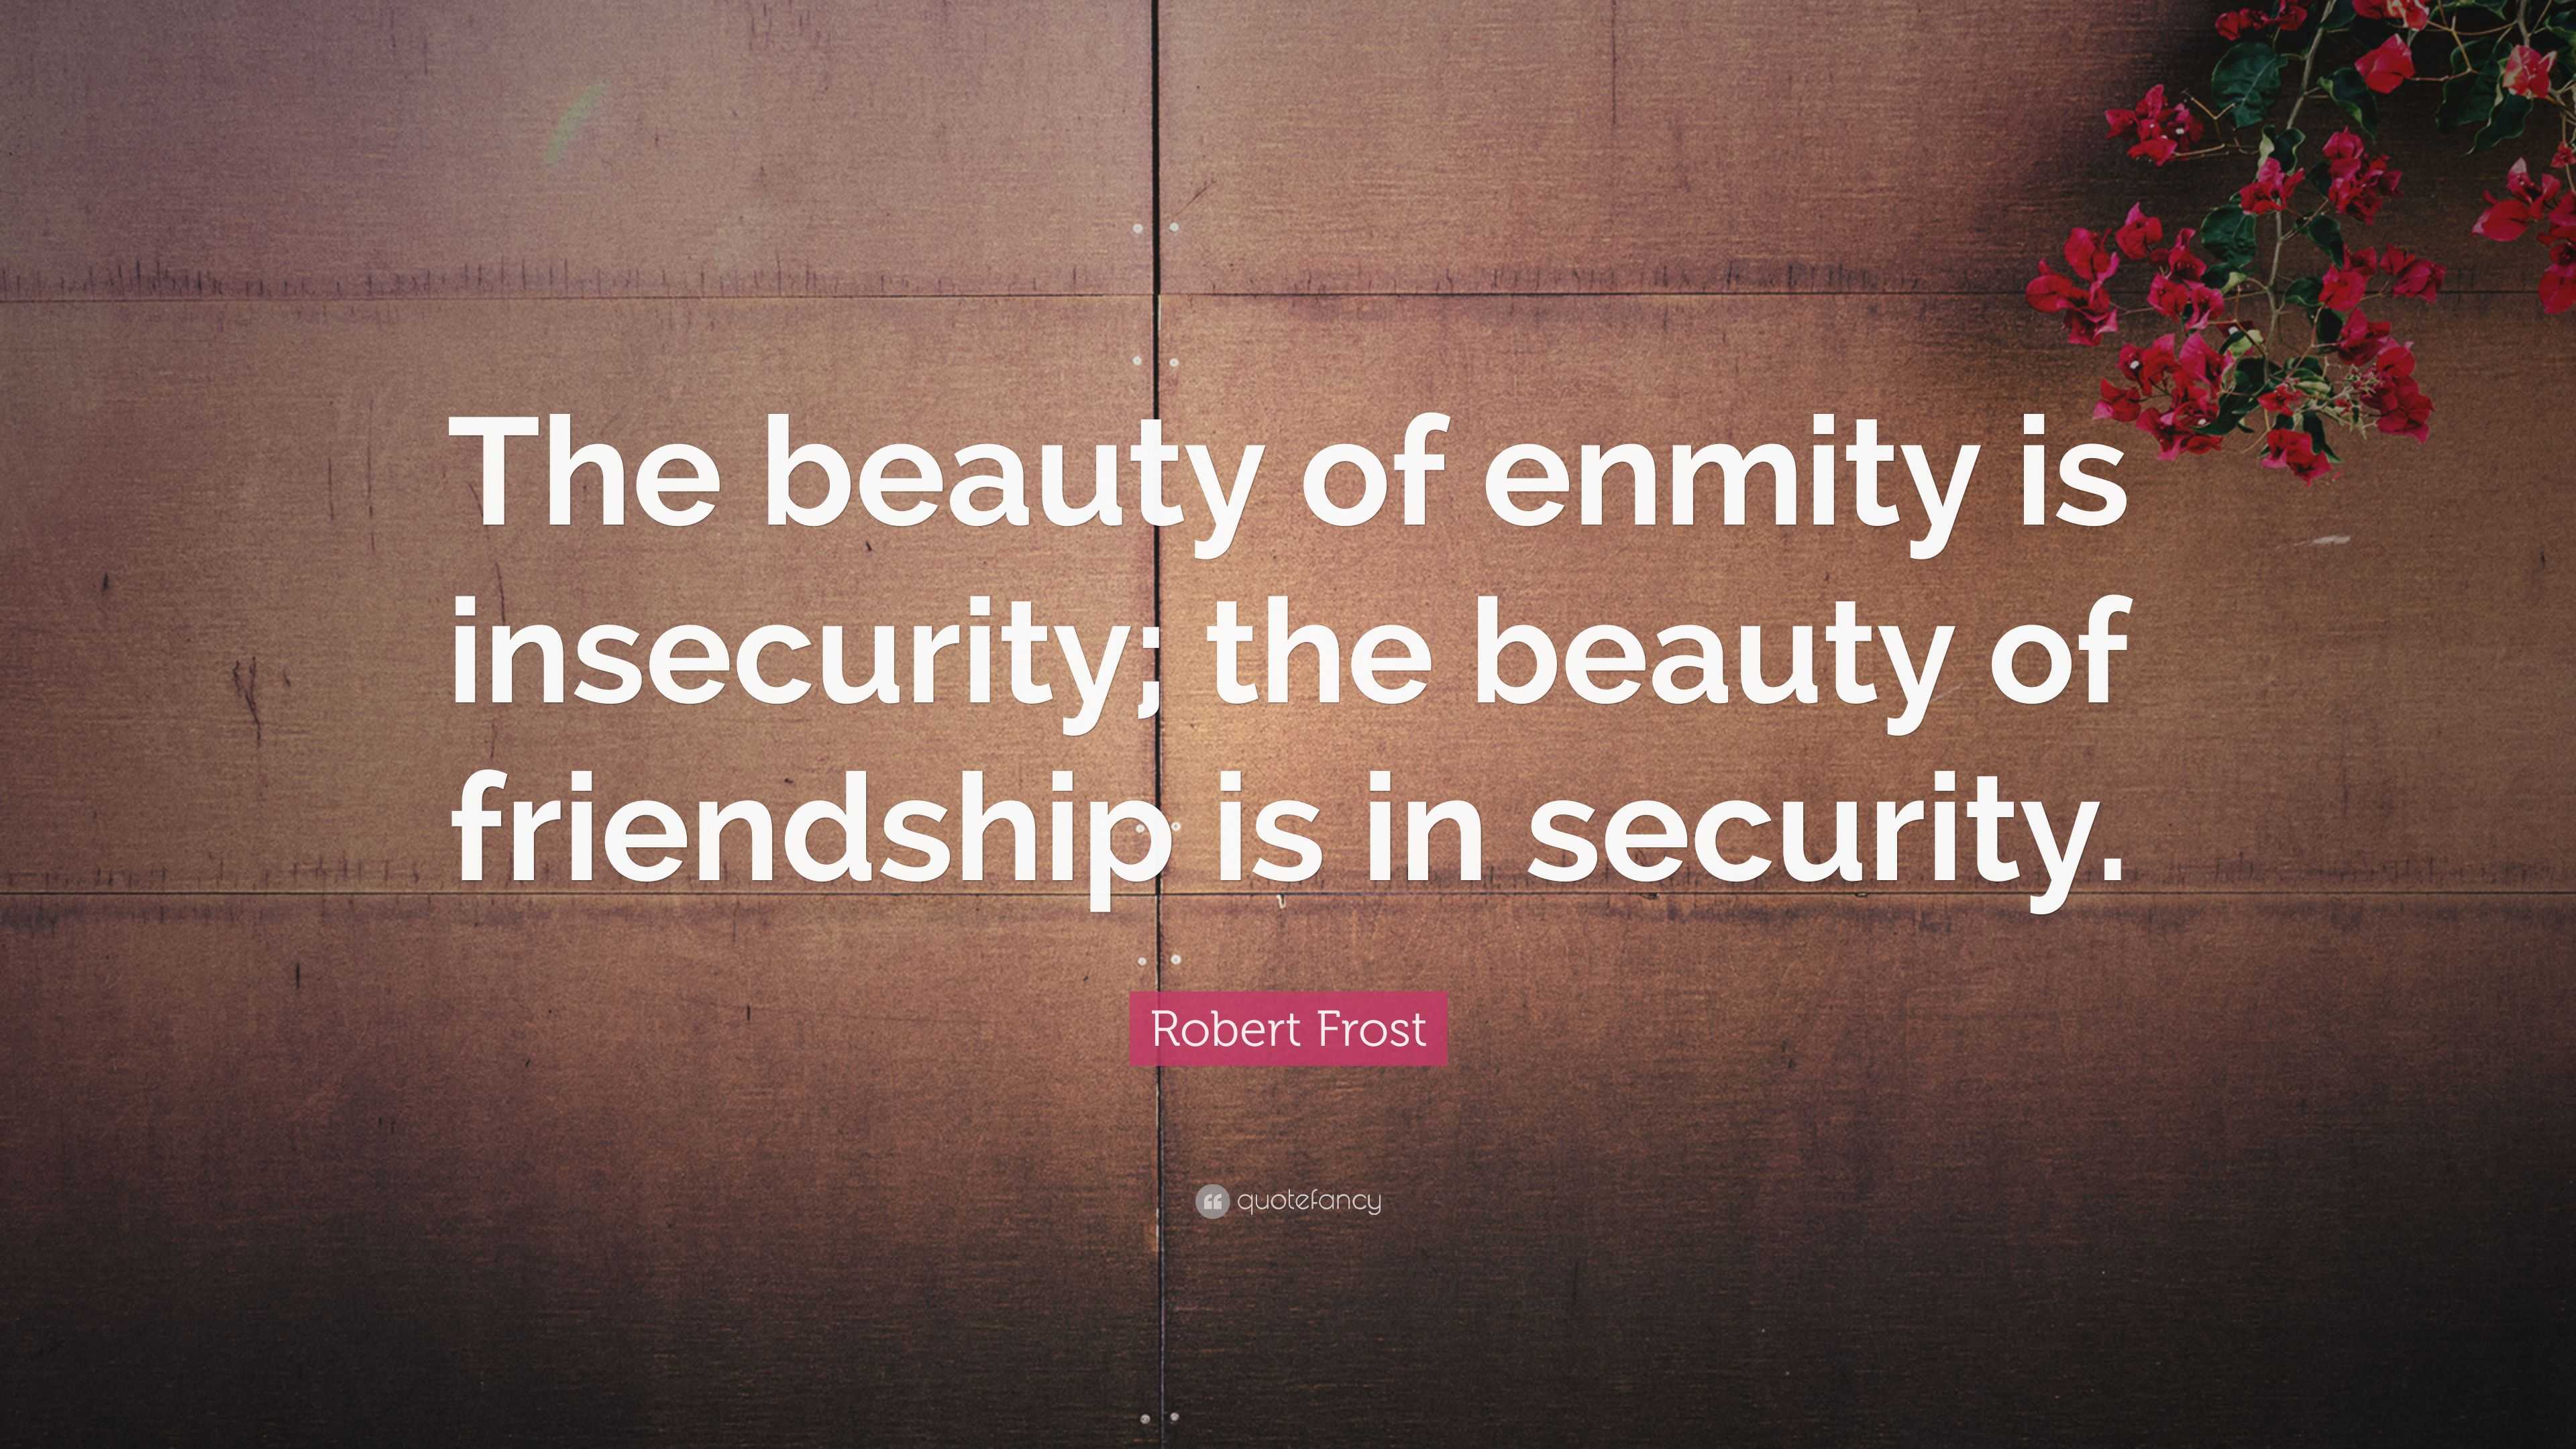 Robert Frost Quote: “The beauty of enmity is insecurity; the beauty of ...